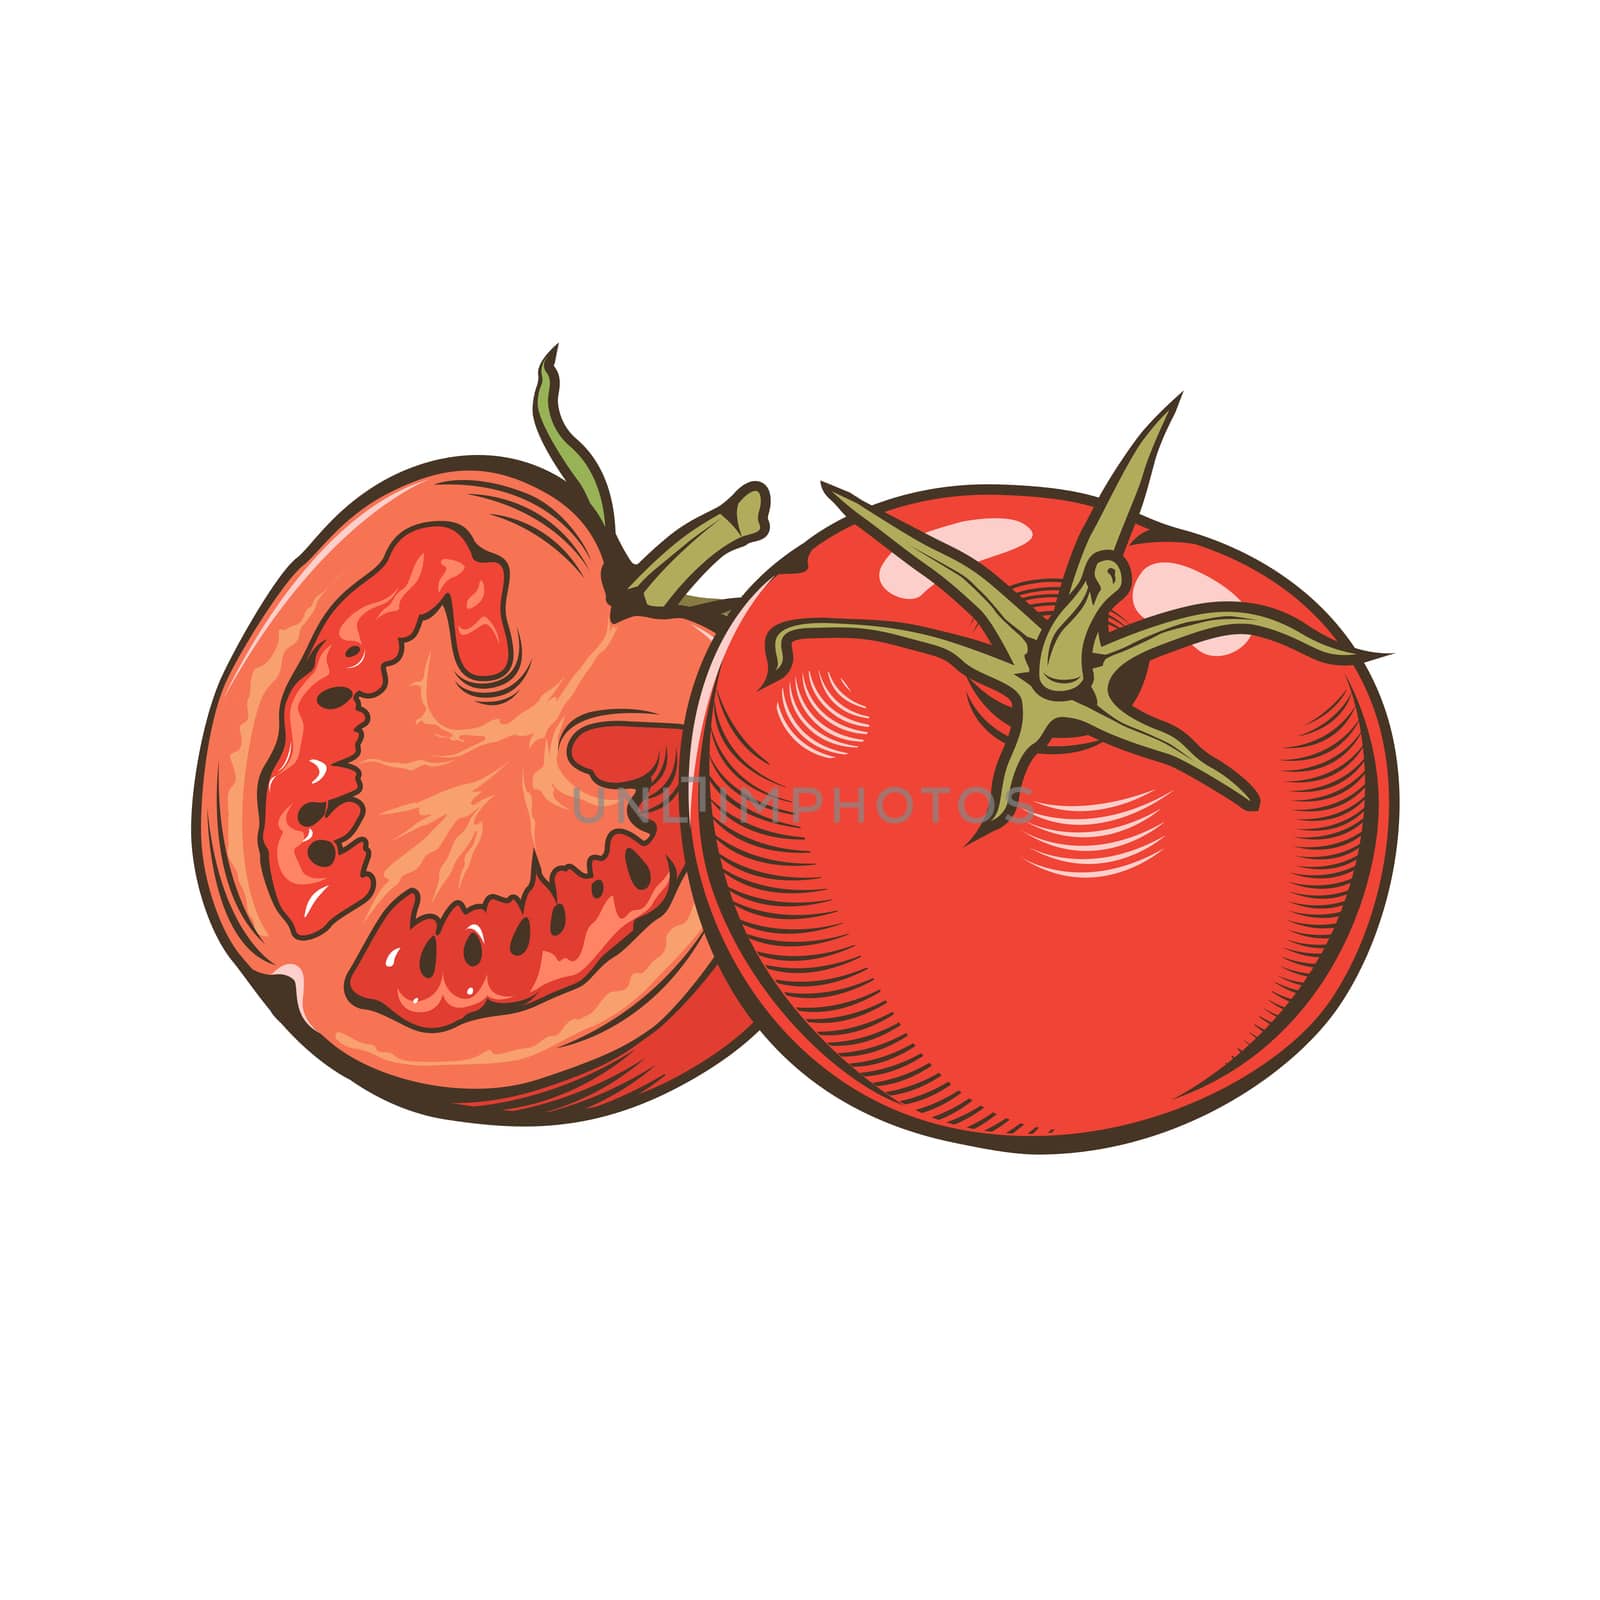 Tomatoes in vintage style by ConceptCafe